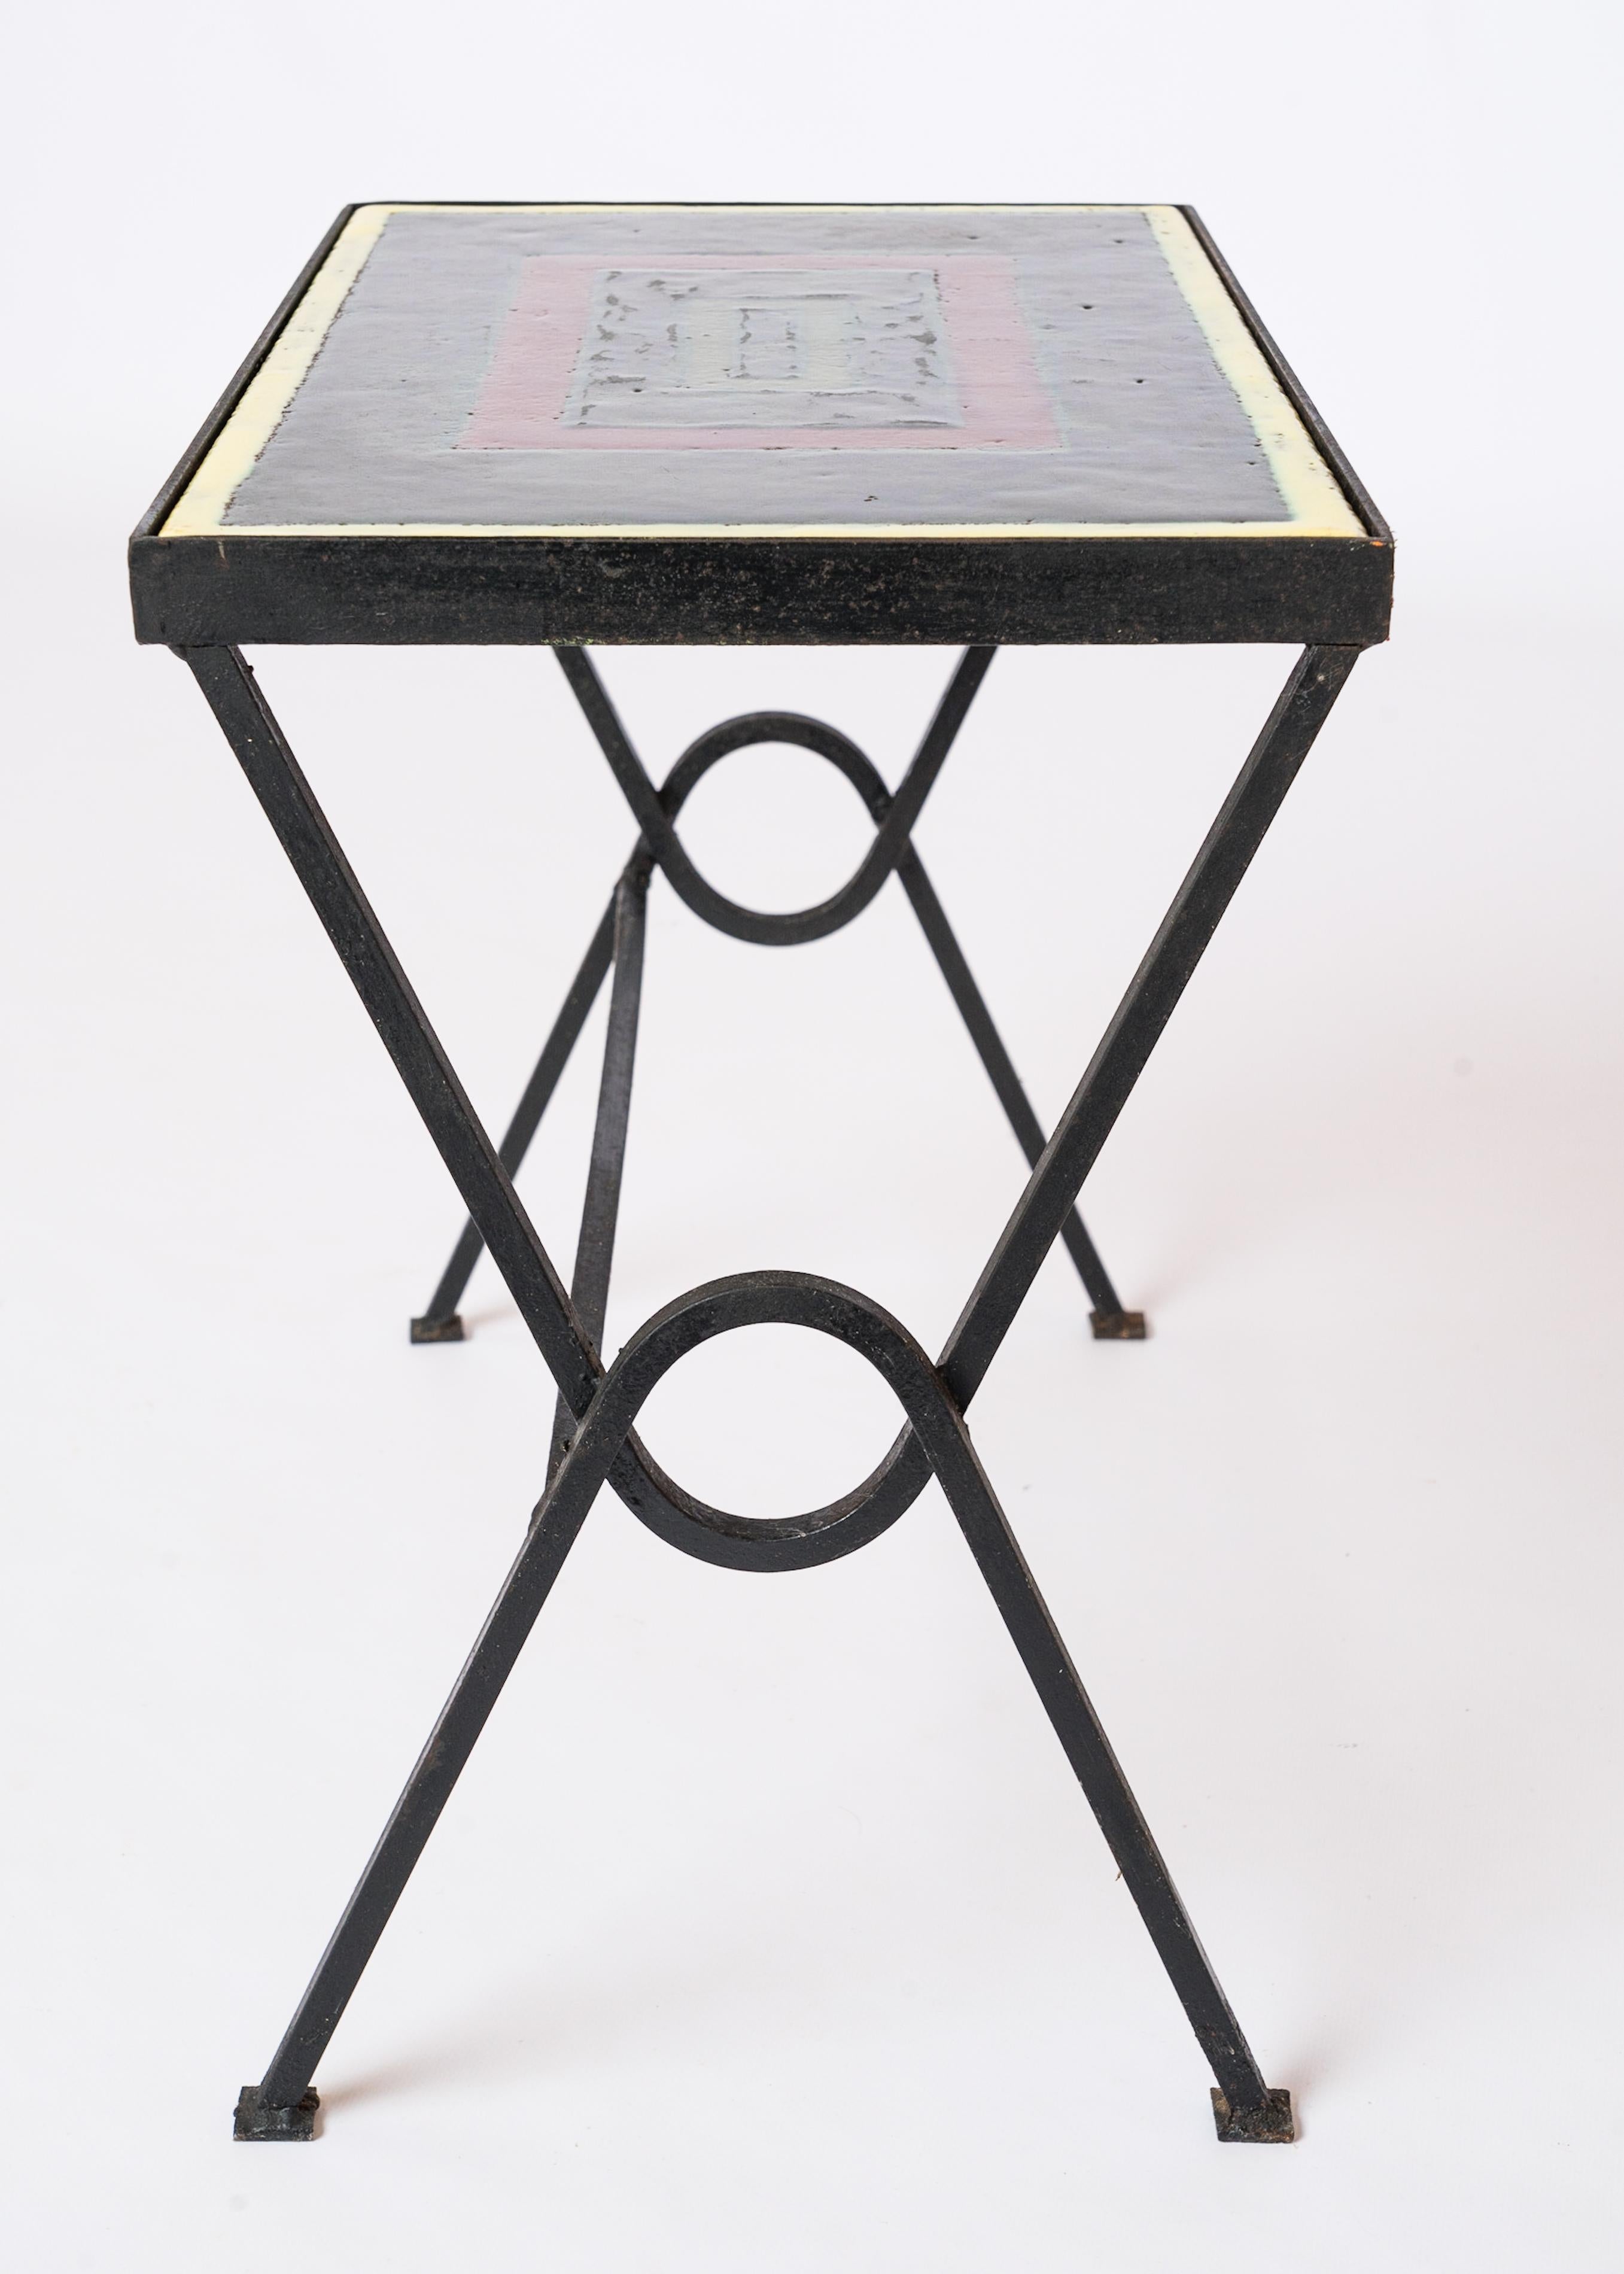 Mid-20th Century Enameled Lava Stone Side Table att. Jacques Adnet - France 1950s For Sale